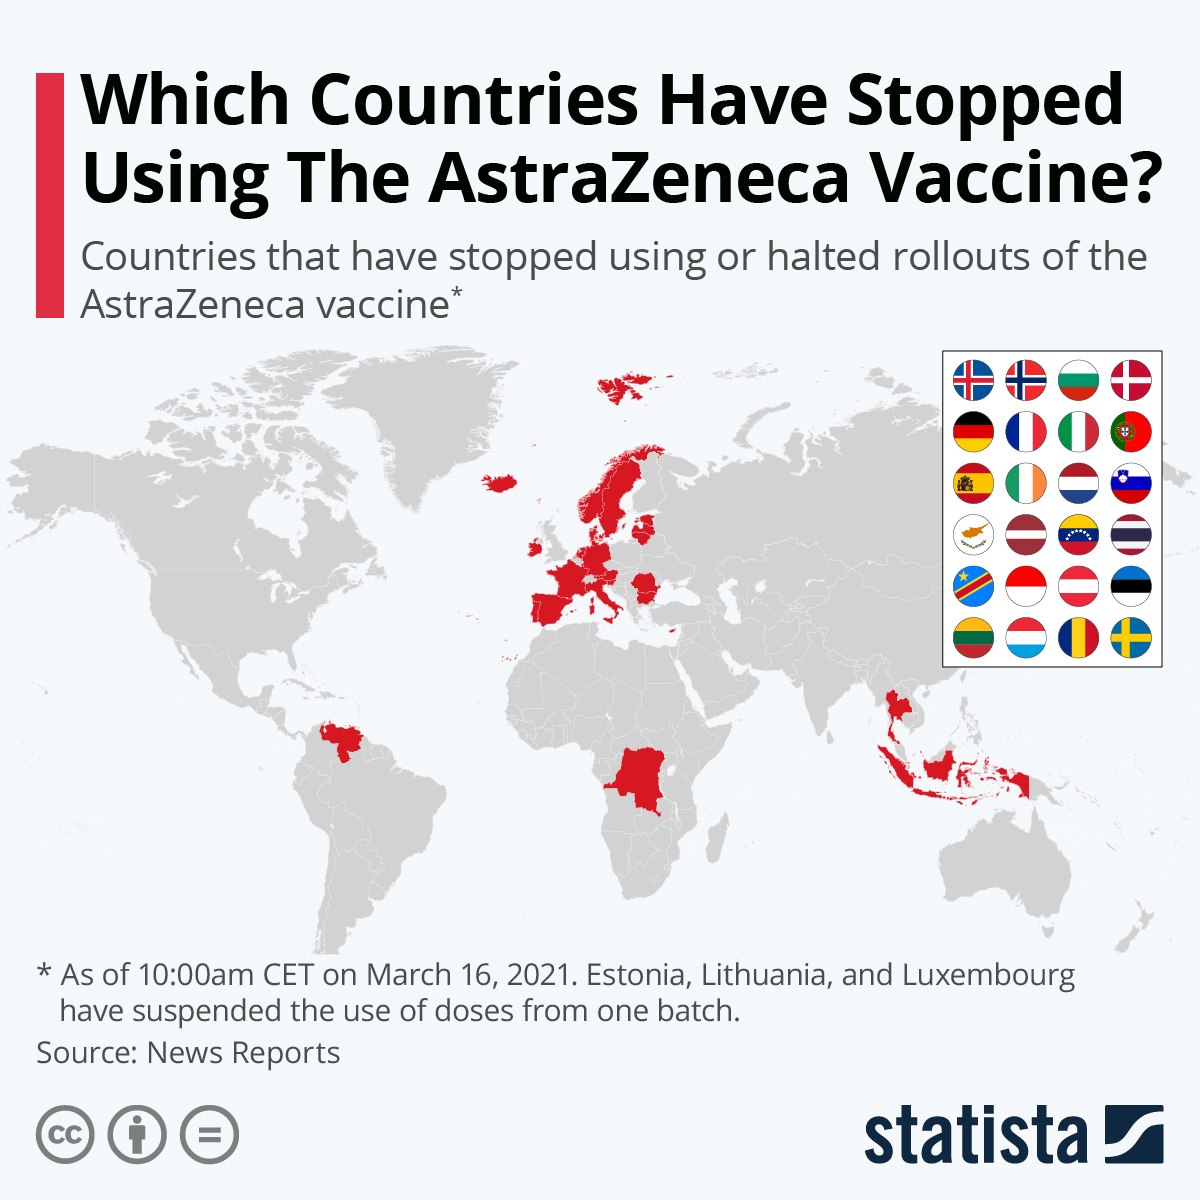 Which Countries Have Stopped Using the AstraZeneca Vaccine?